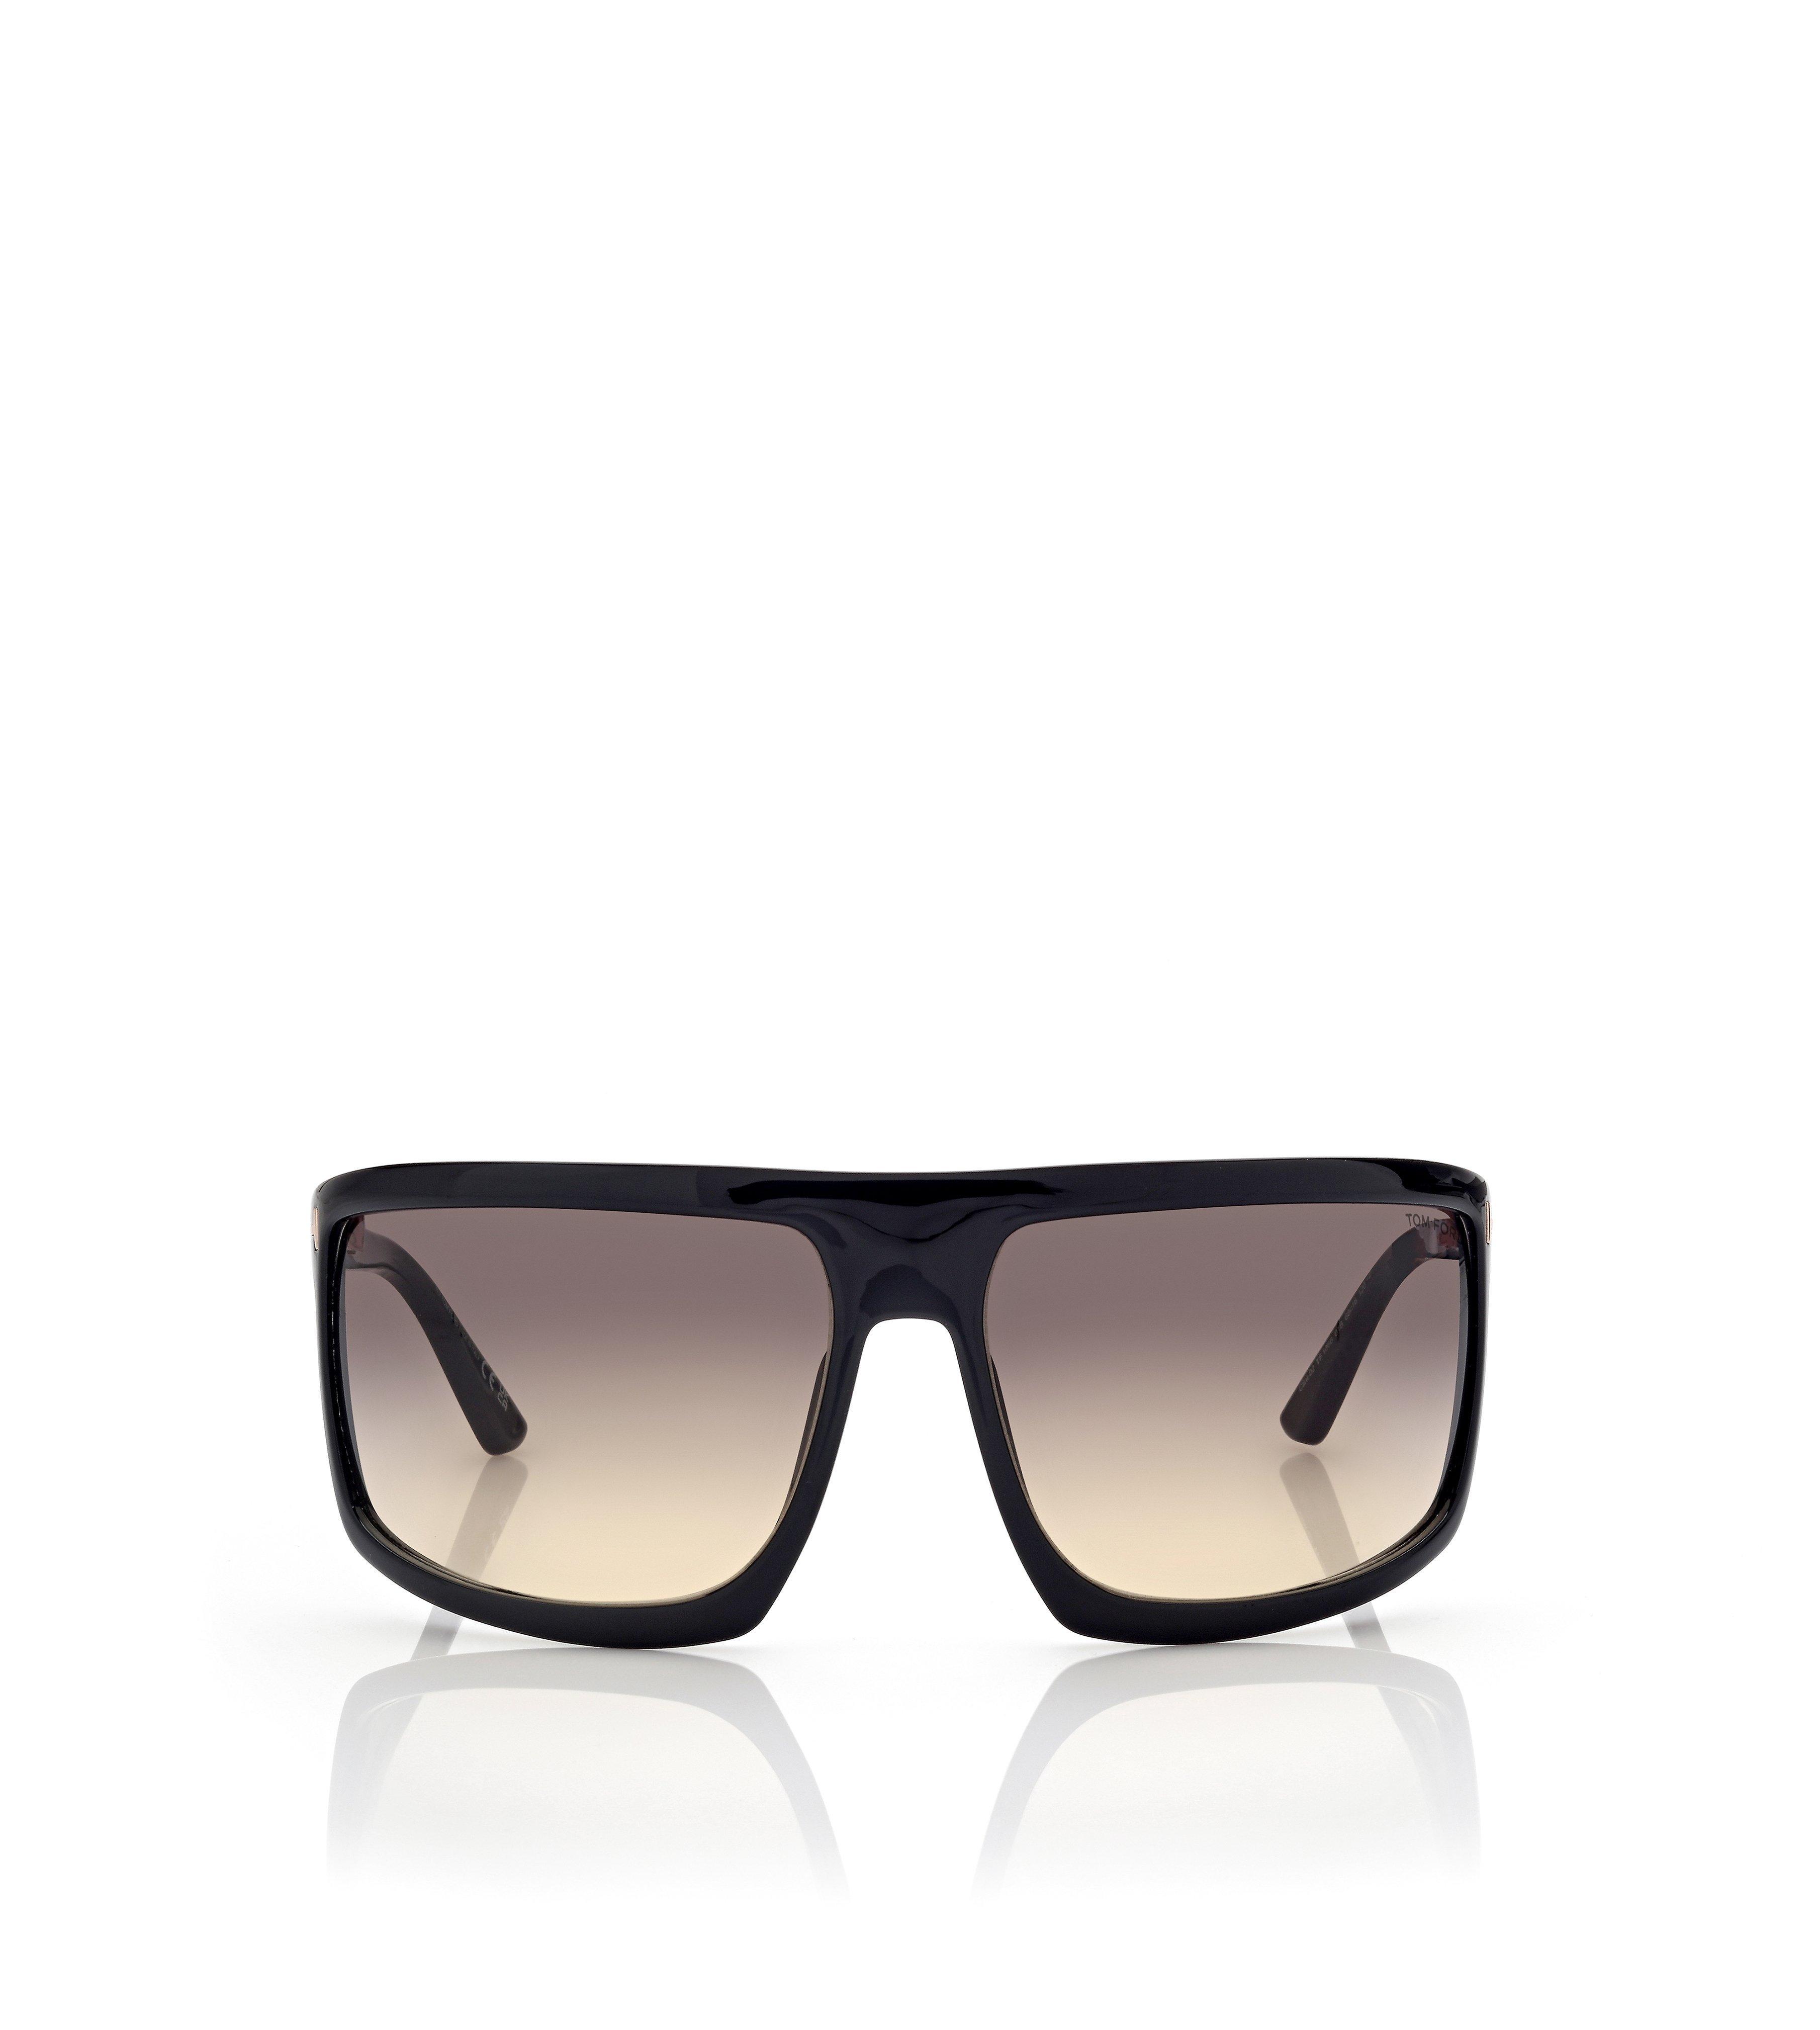 Tom Ford Outlet: sunglasses for woman - Brown